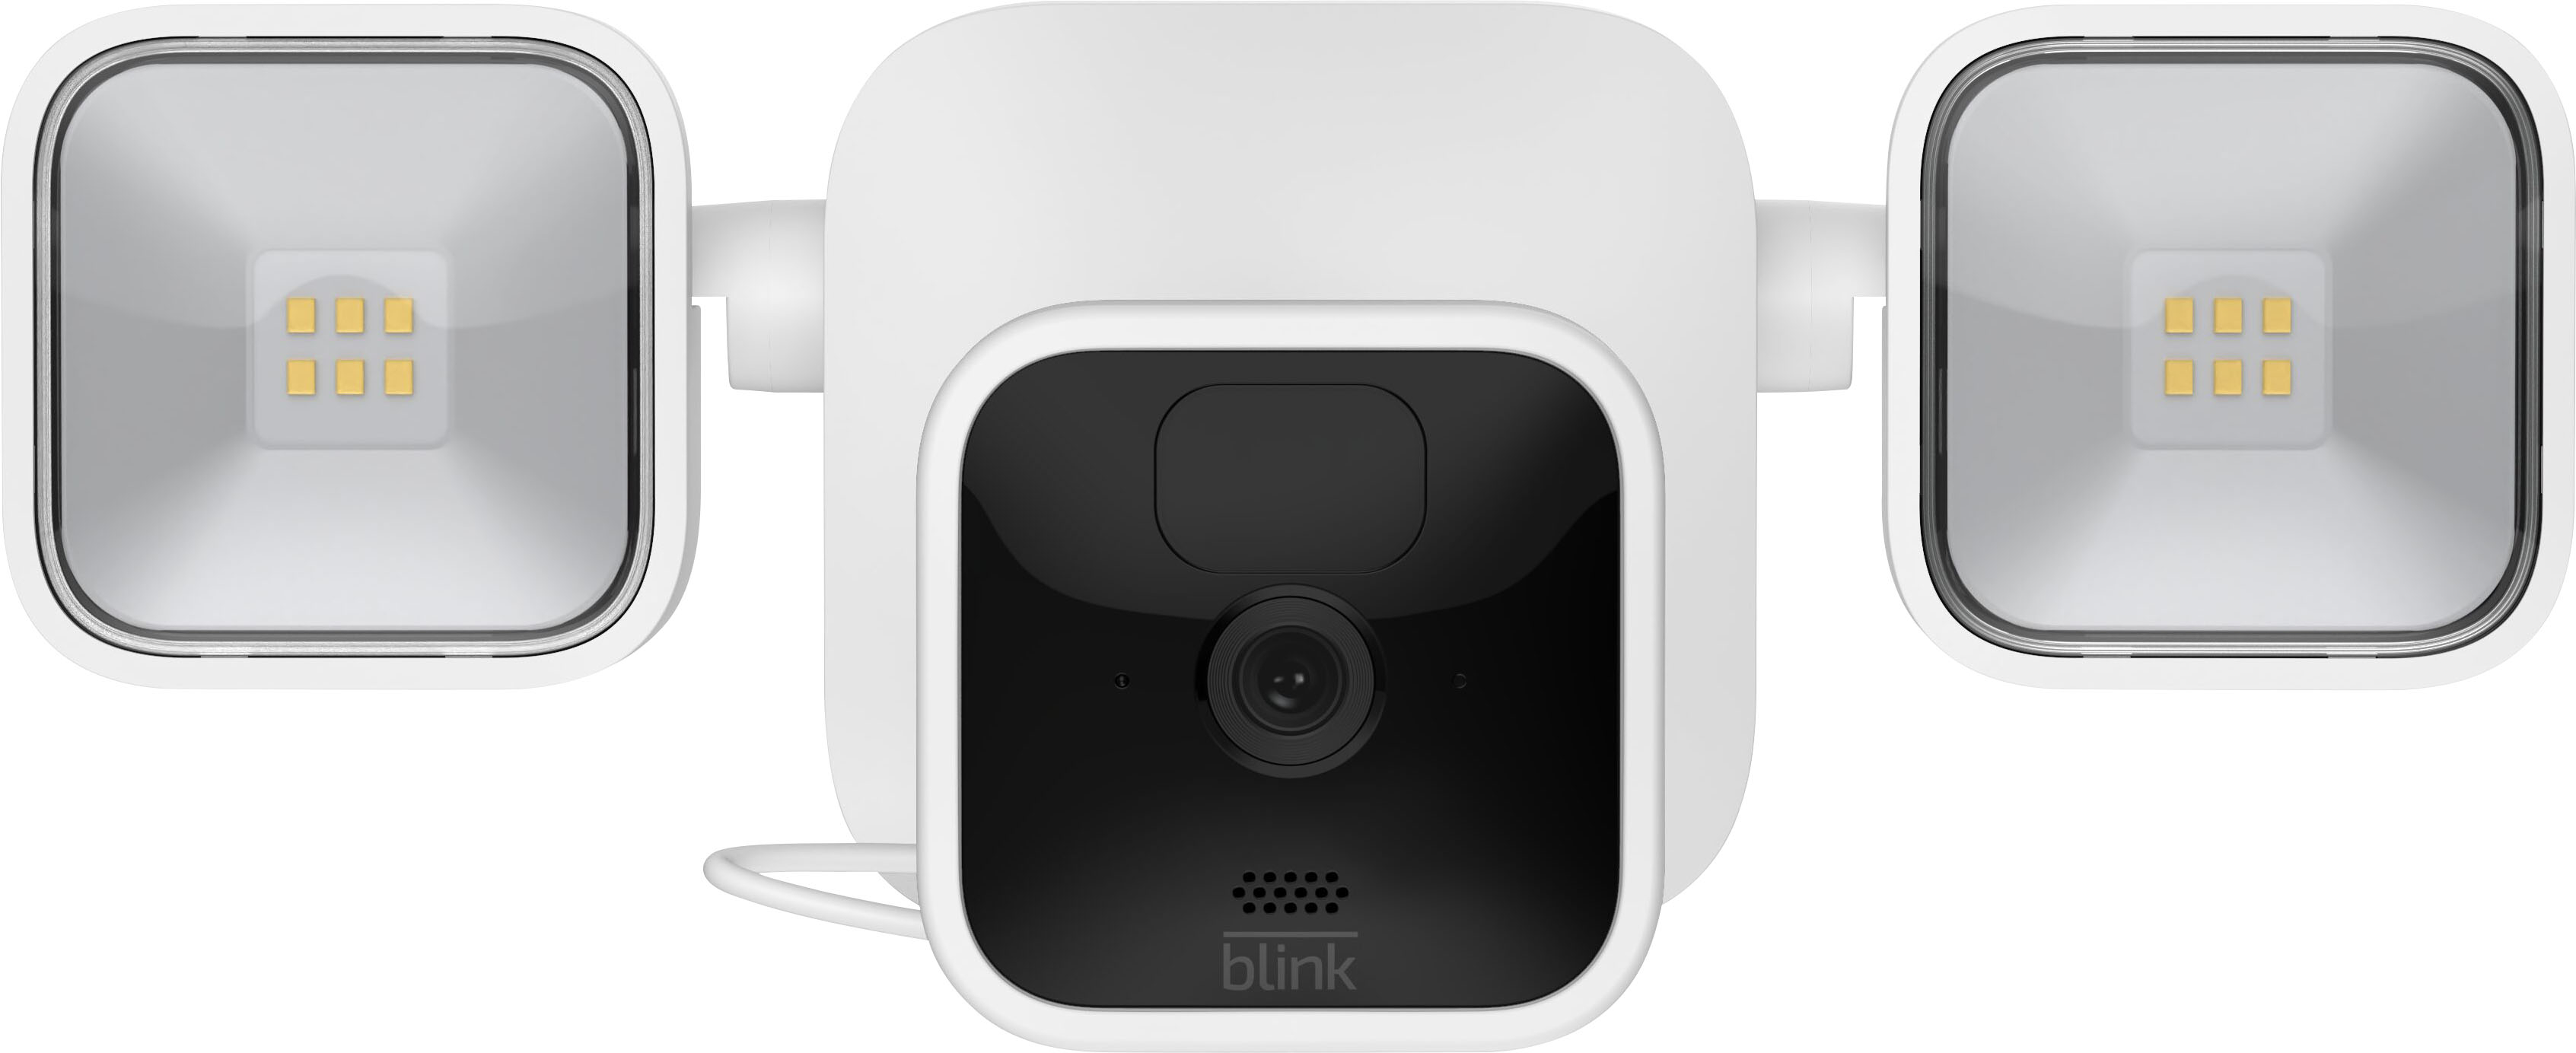 Blink - Outdoor Camera + Floodlight Kit - 1 Camera, wireless, HD floodlight mount and smart security camera - White